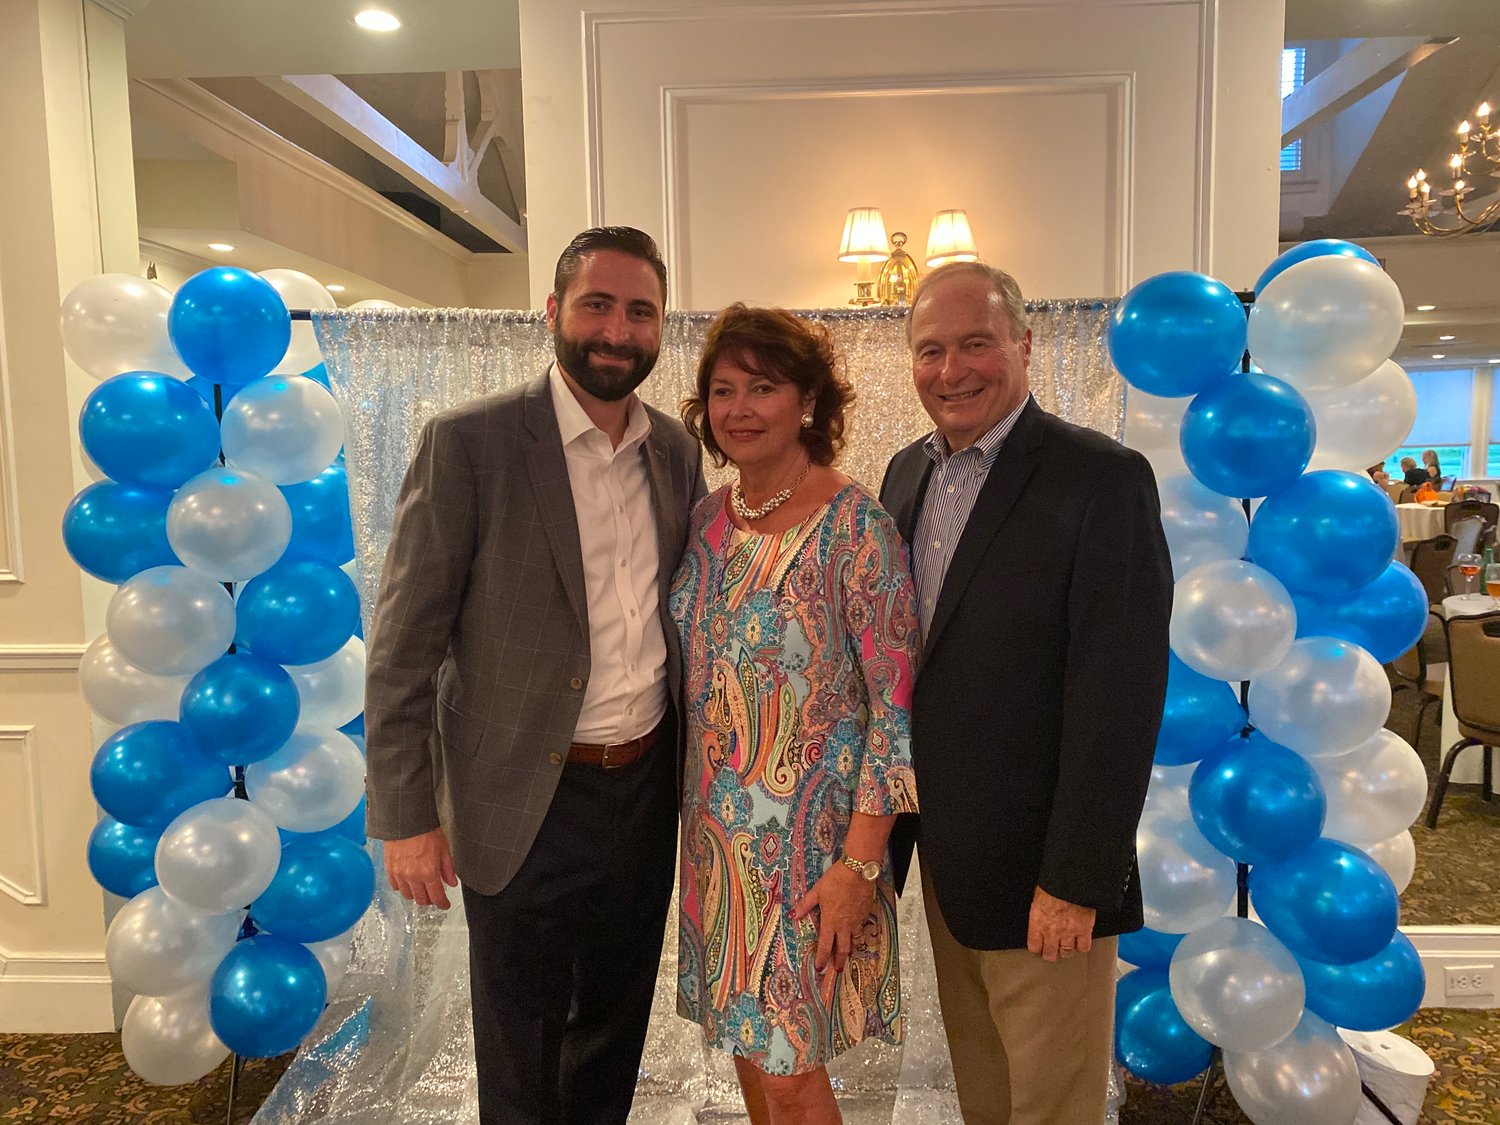 Carol Lombardi, center, celebrated her retirement after 27 years teaching at St. Mark’s with her son Kevin, left, and husband Bruce, right.